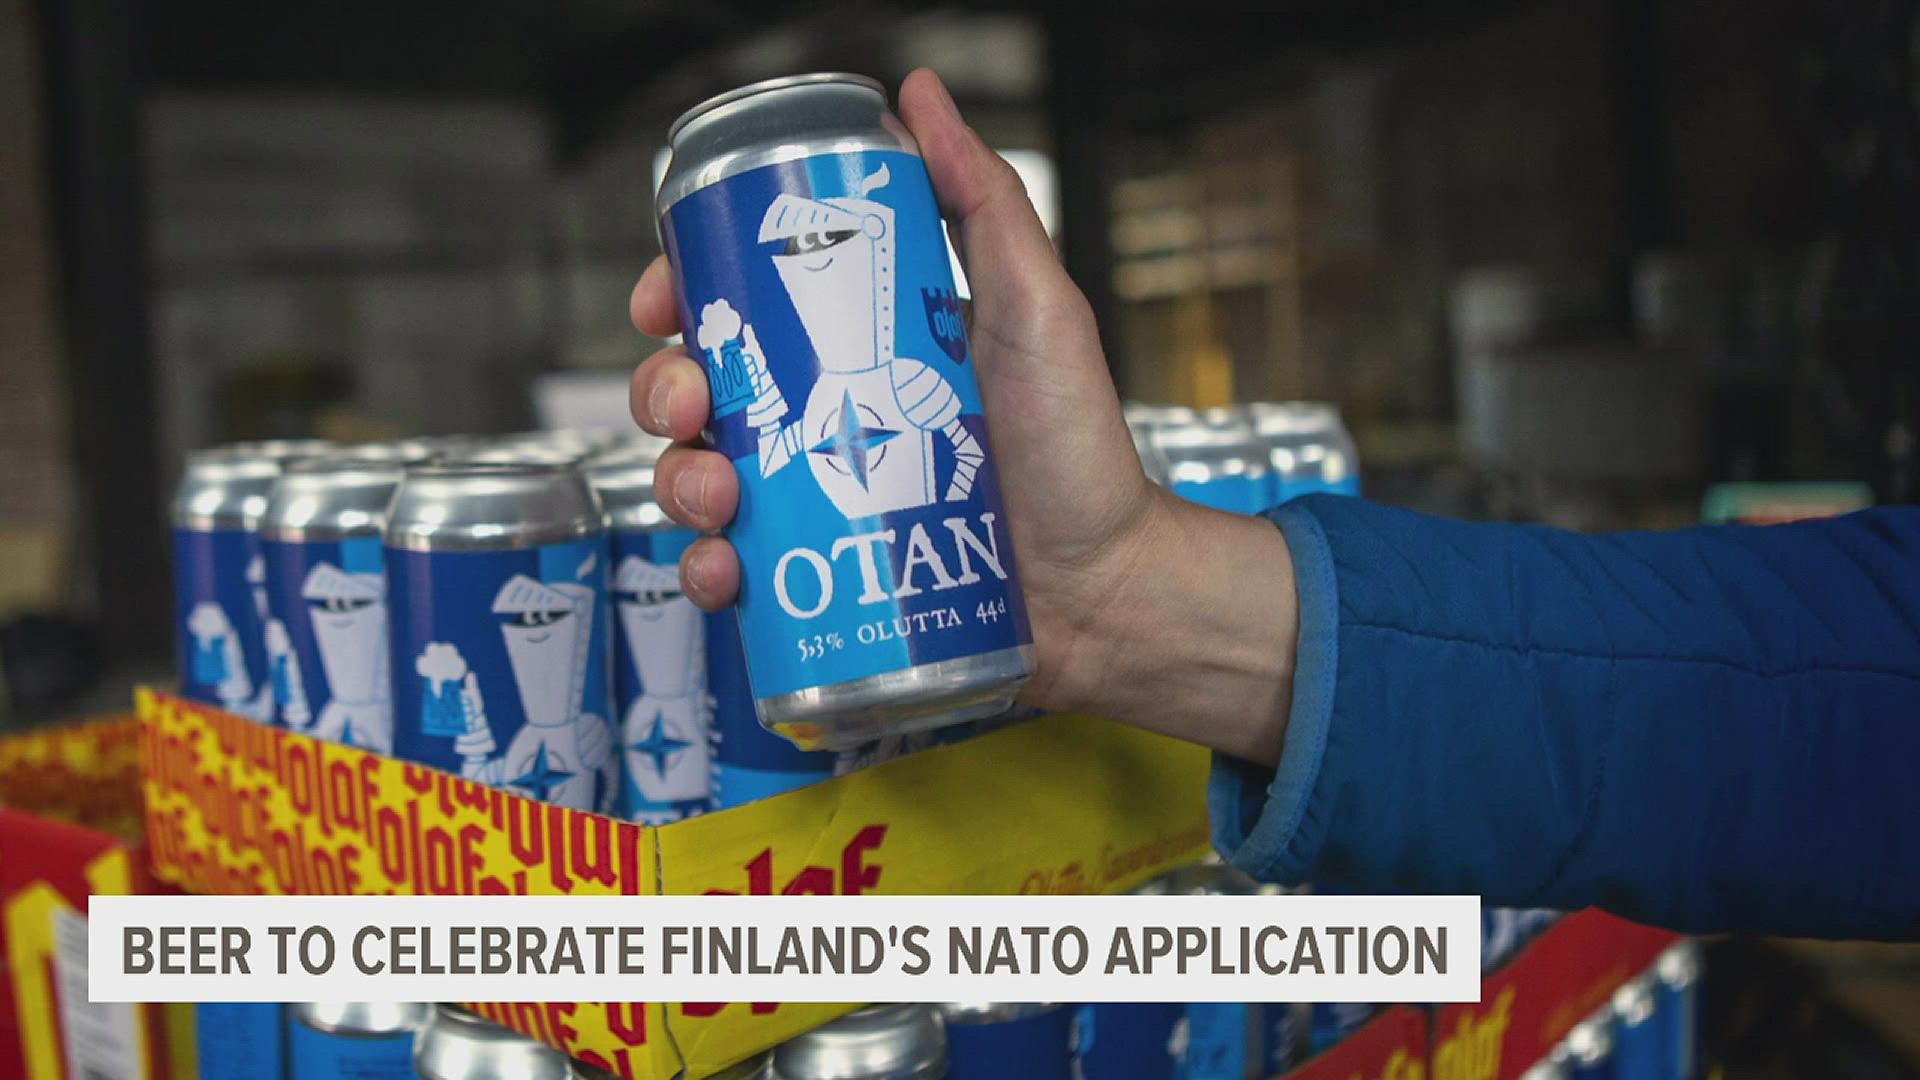 In honor of Finland's NATO application, the brewery put out a new brew that translates to "I'll have some beer" in Finnish.